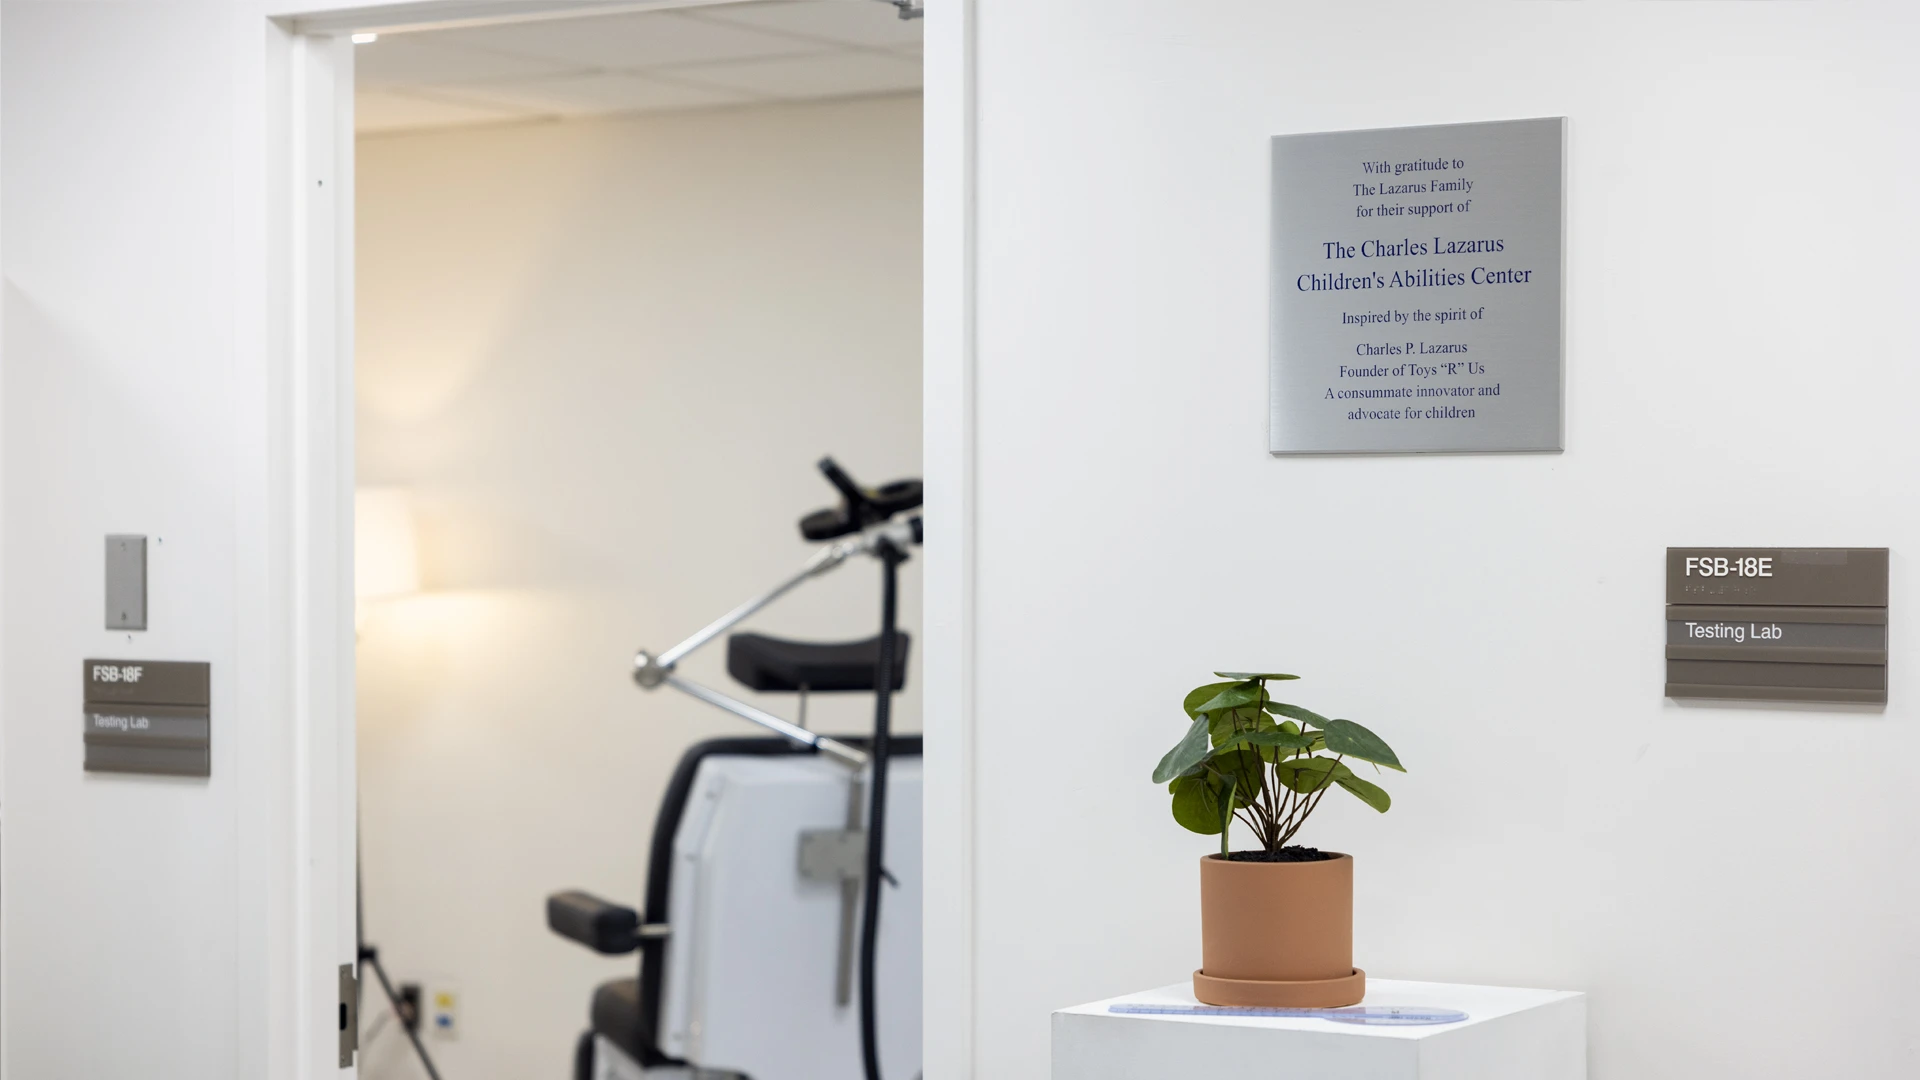 The Charles Lazarus Children's Abilities Center offers not only therapy, but also conducts research in various areas, including concussion and cerebral palsy.